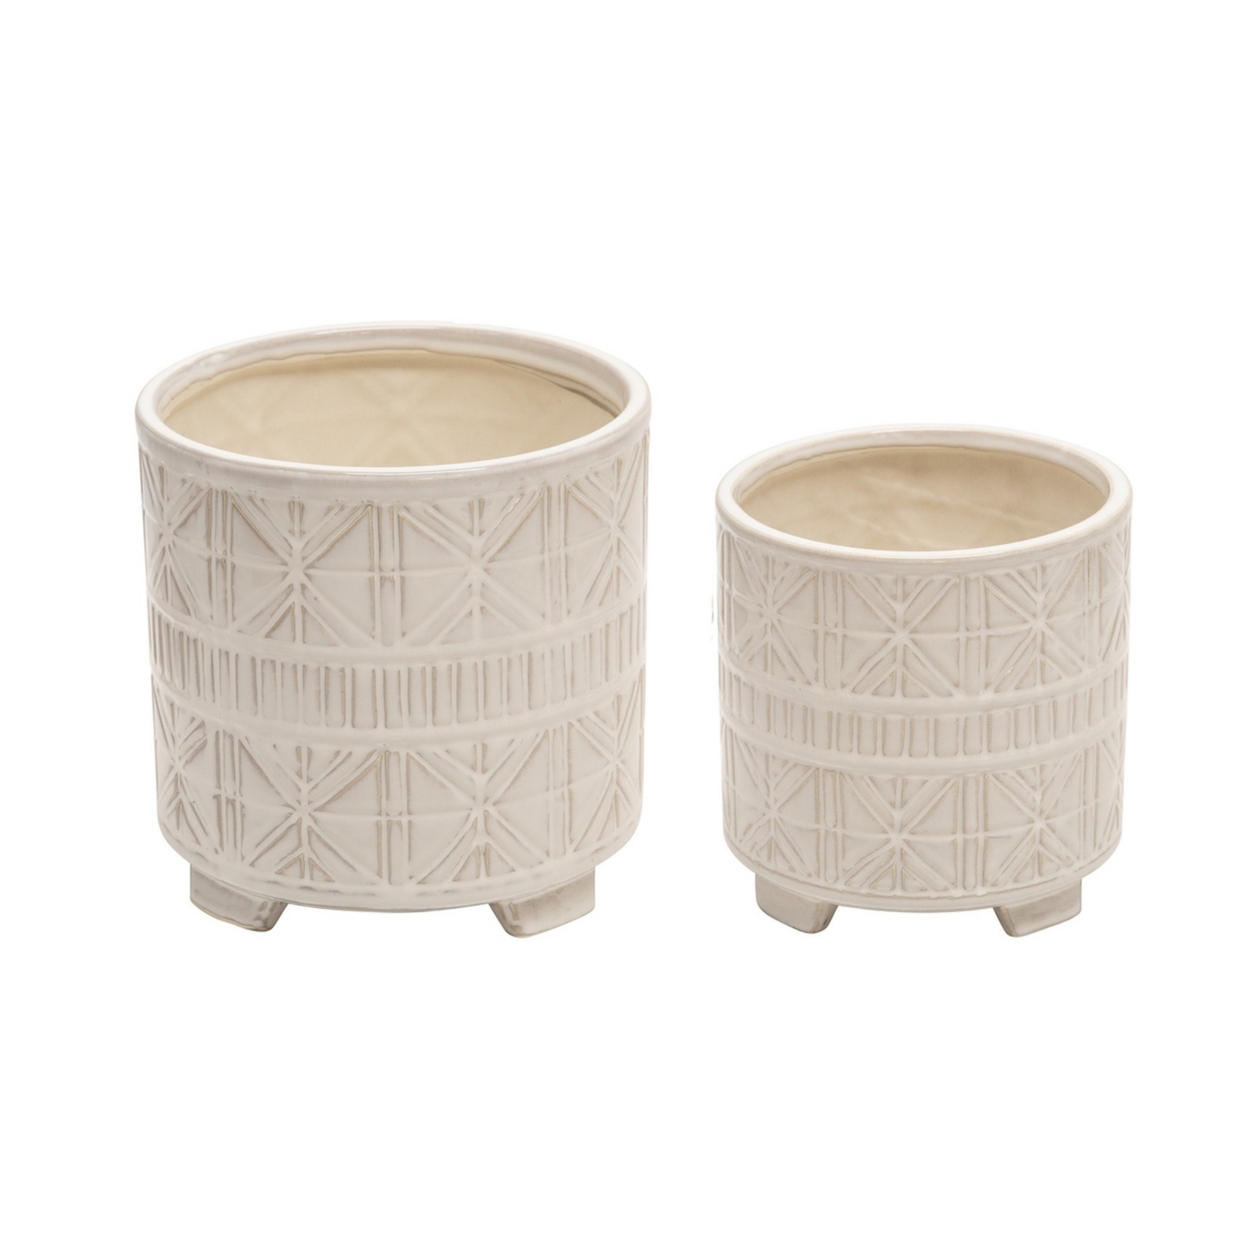 Footed Planter With Ceramic And Geometric Pattern, Set Of 2, Beige- Saltoro Sherpi